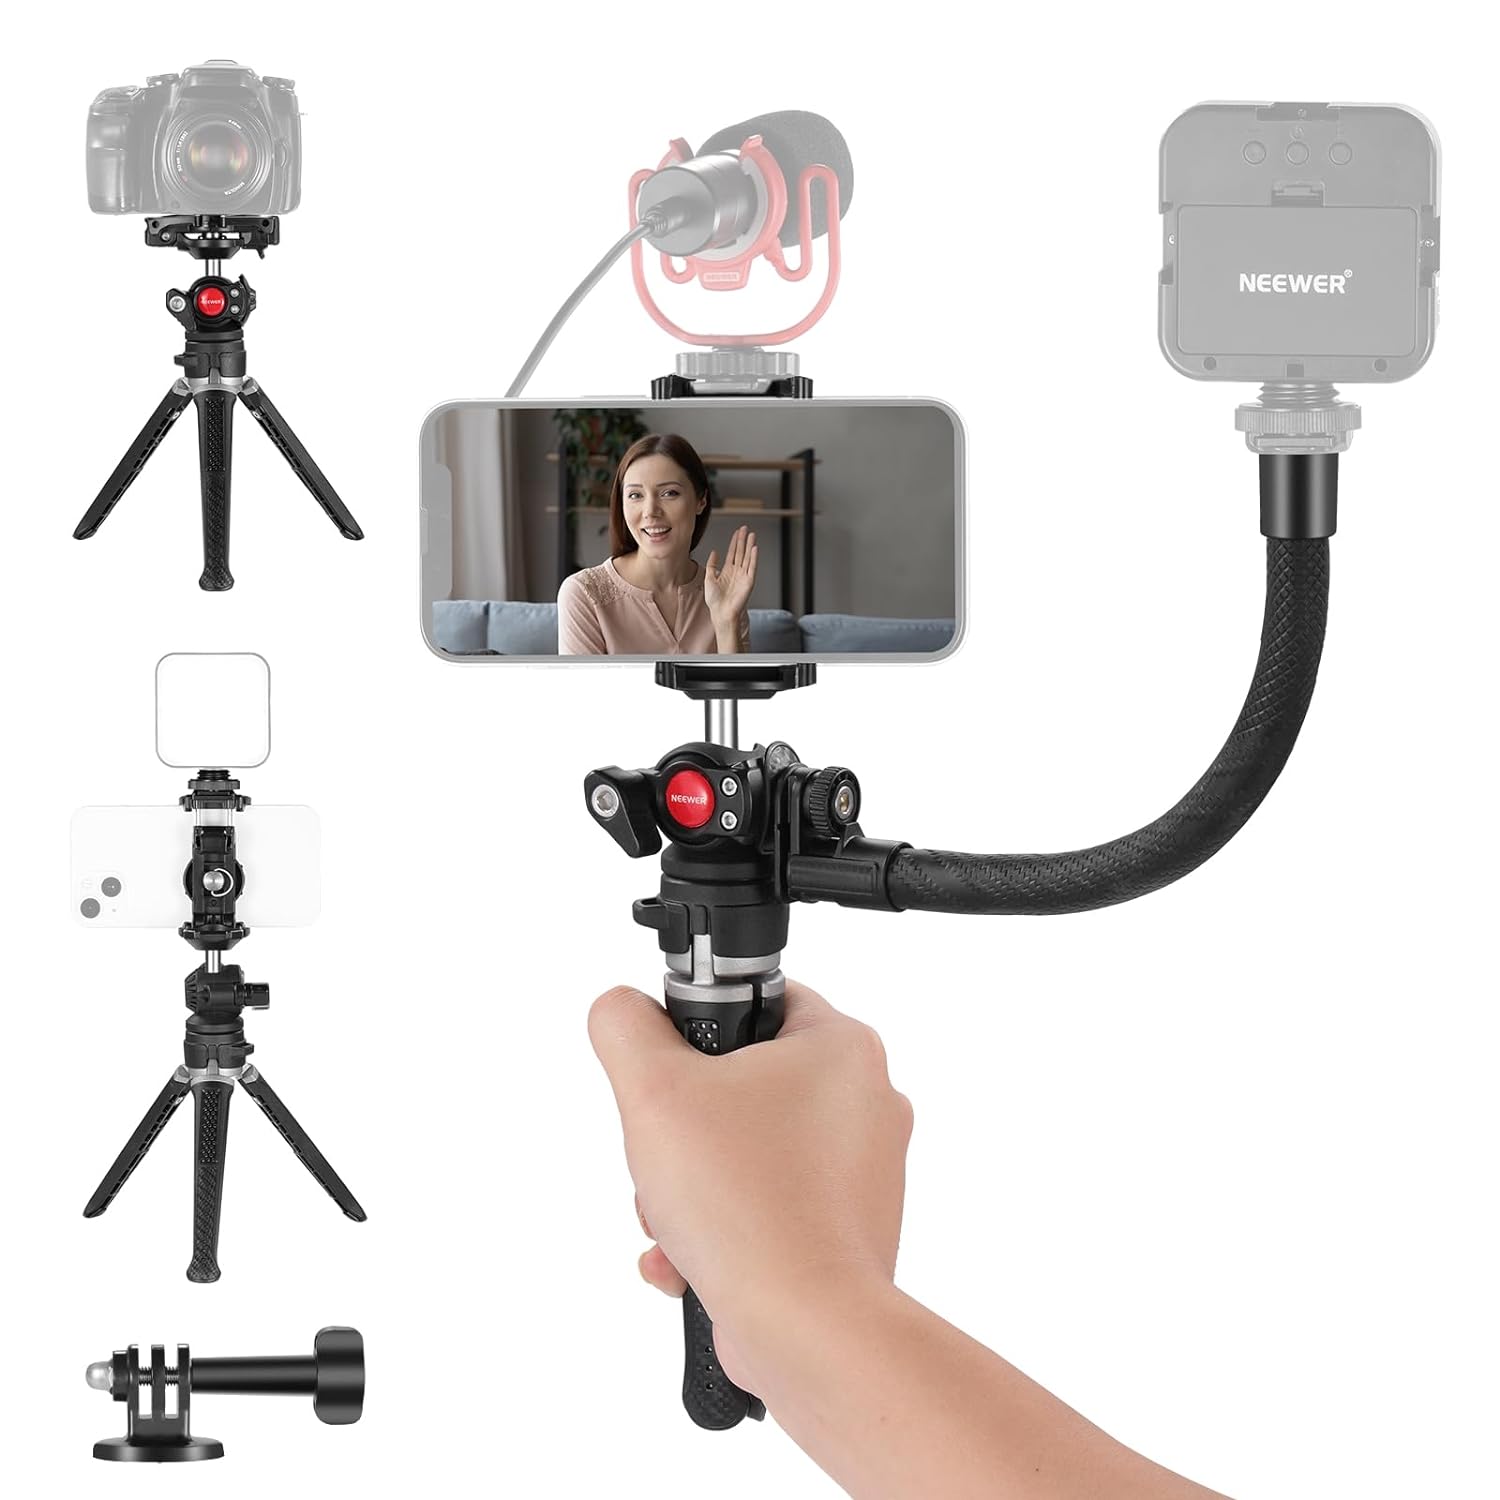 NEEWER Mini Camera Tripod with 2 in 1 Phone Holder/Action Cam Adapter/Flexible Arm for LED Light/Mic, Portable Travel Tripod Compatible with GoPro iPhone for Vlogging Filming Video Recording, TS006